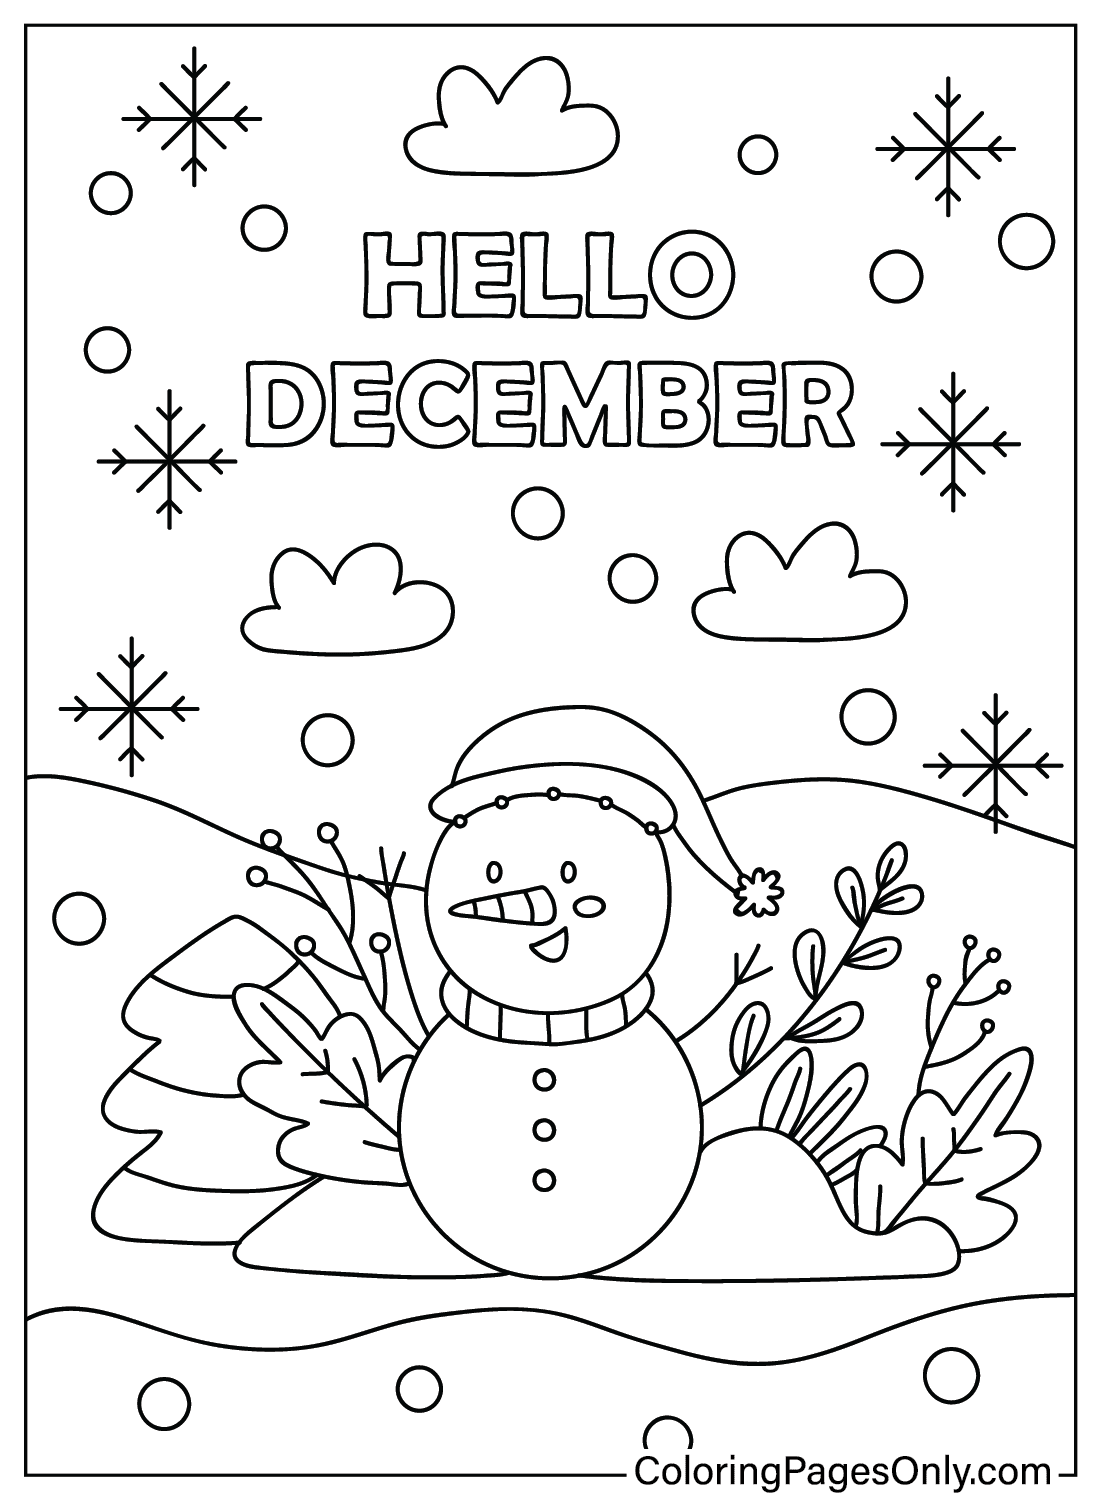 Free Hello December Coloring Page